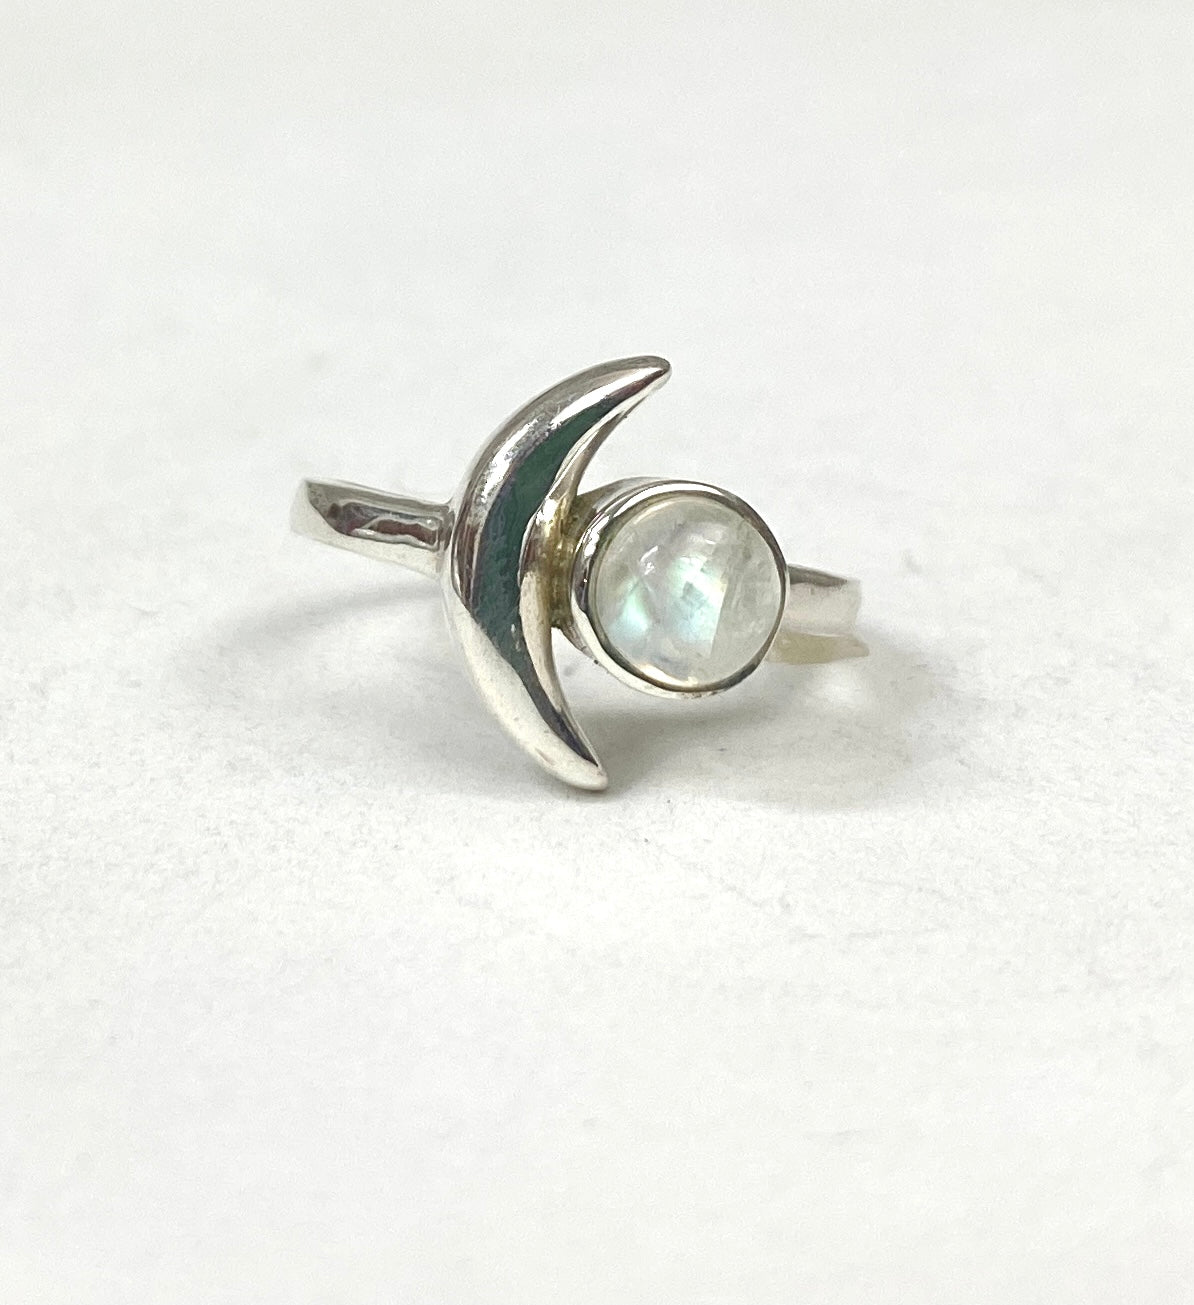 Sterling Silver Crescent Moon & Moonstone Ring - Available in sizes 5-9